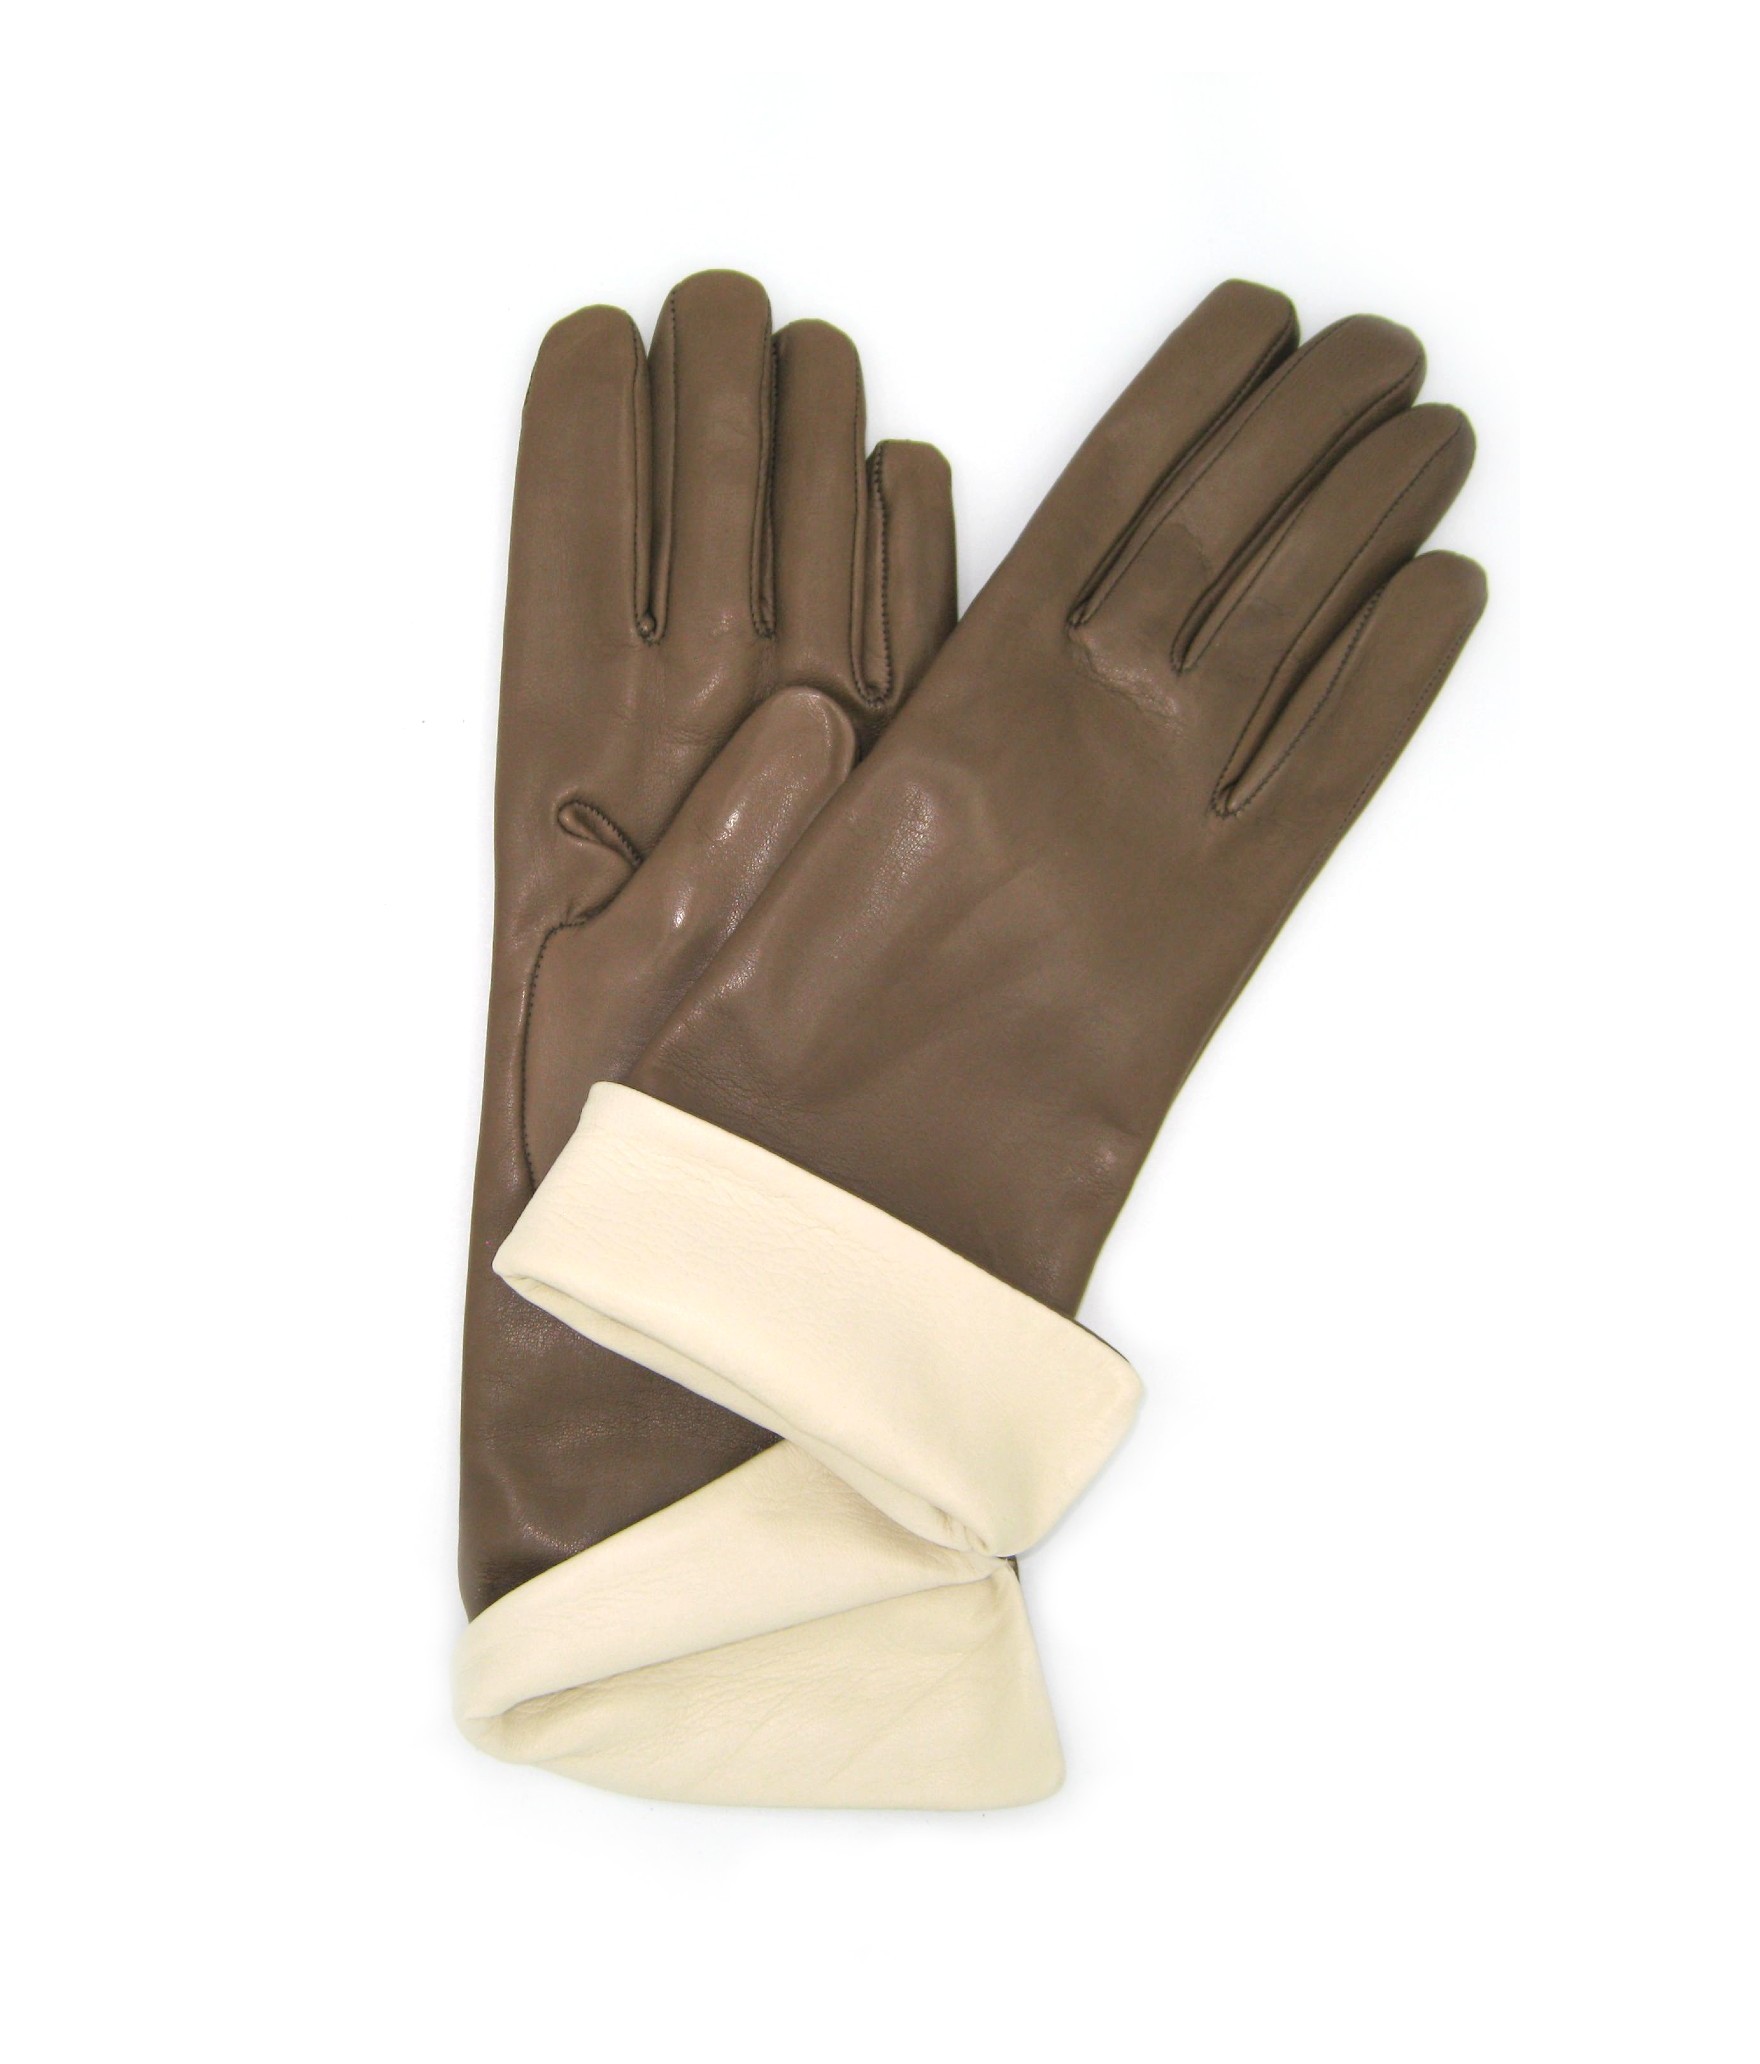 Nappa leather gloves with cuff, cashmere lined   Mud/Cream